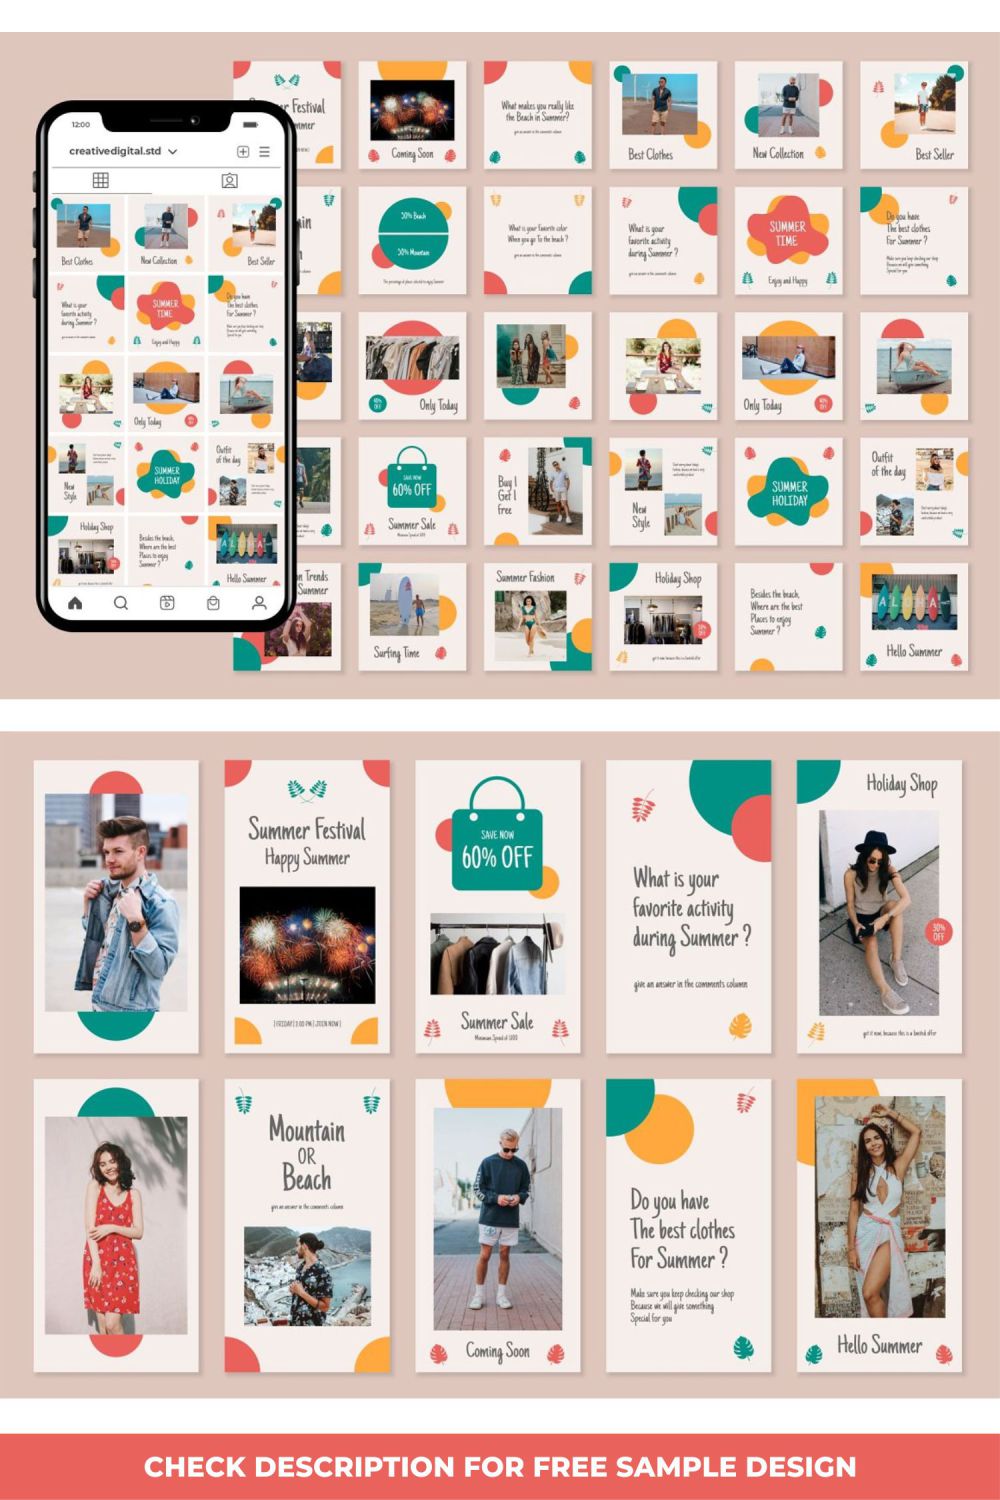 Summer Fashion Marketing Story and Icon Social Media Template Pinterest Image.